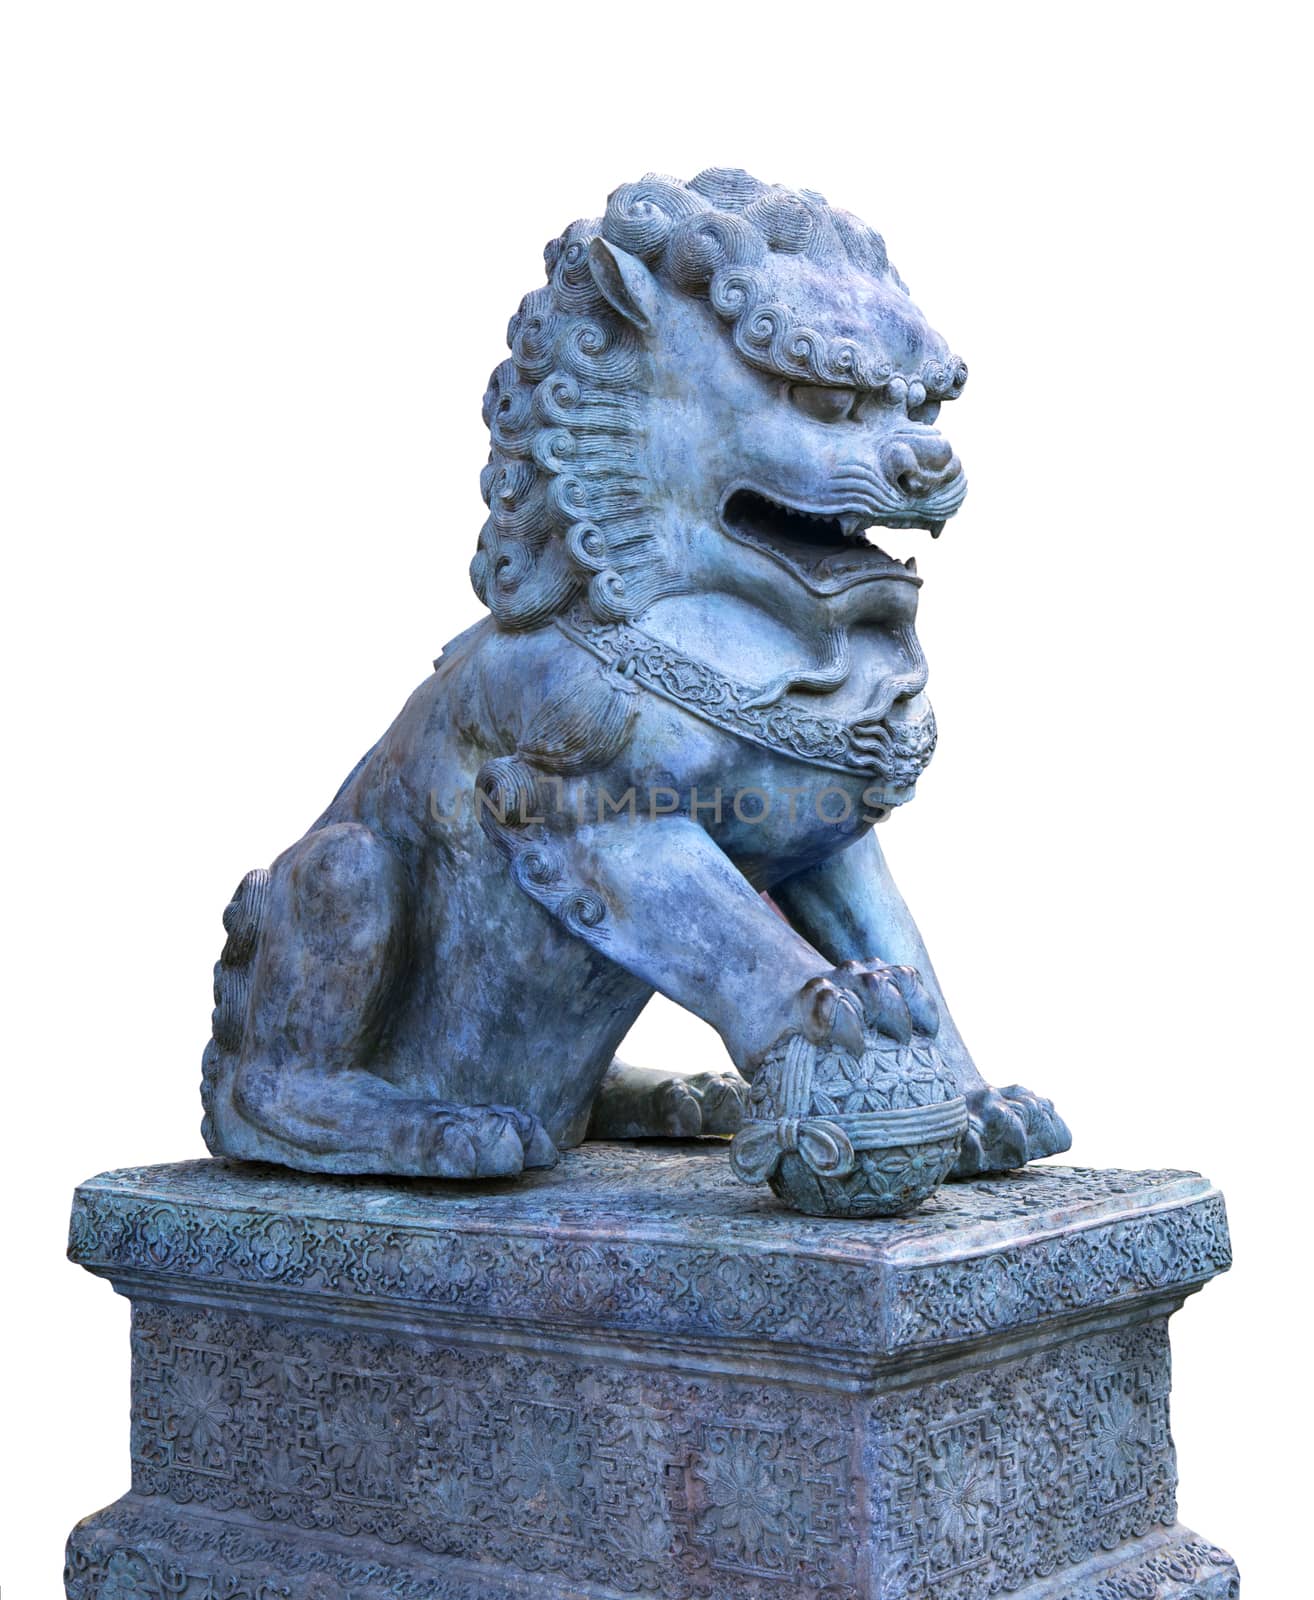 Traditional asian lion sculpture guarding an entrance, isolated over white